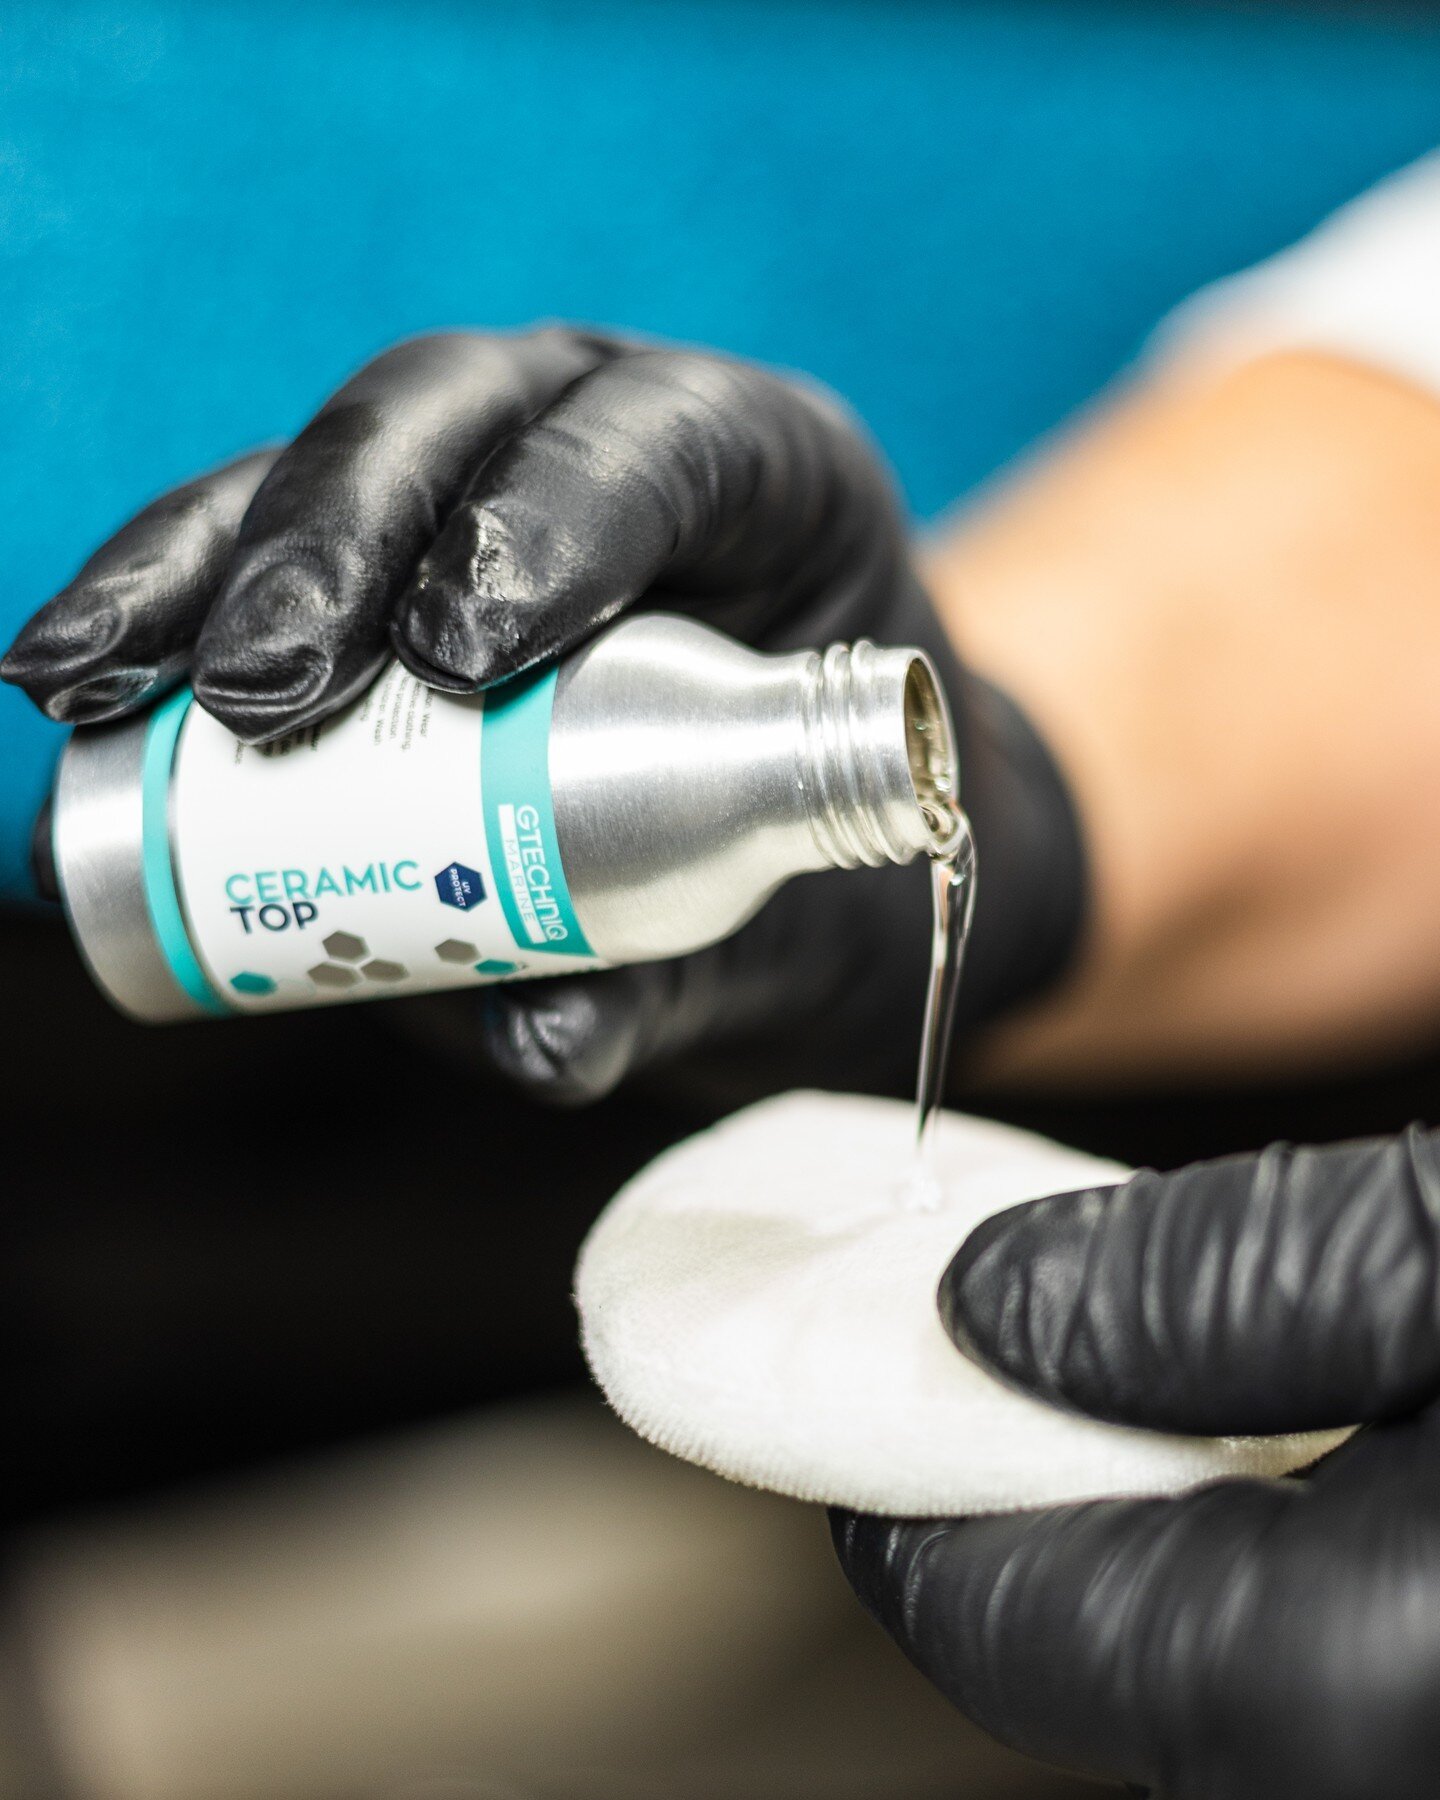 Do you already have Gtechniq Marine's Ceramic Base installed on your boat but want more protection? Gtechniq Marine's Ceramic Top is the product you are looking for. We use Ceramic Top because it repels dirt, adds unmatched gloss levels, and is anti-